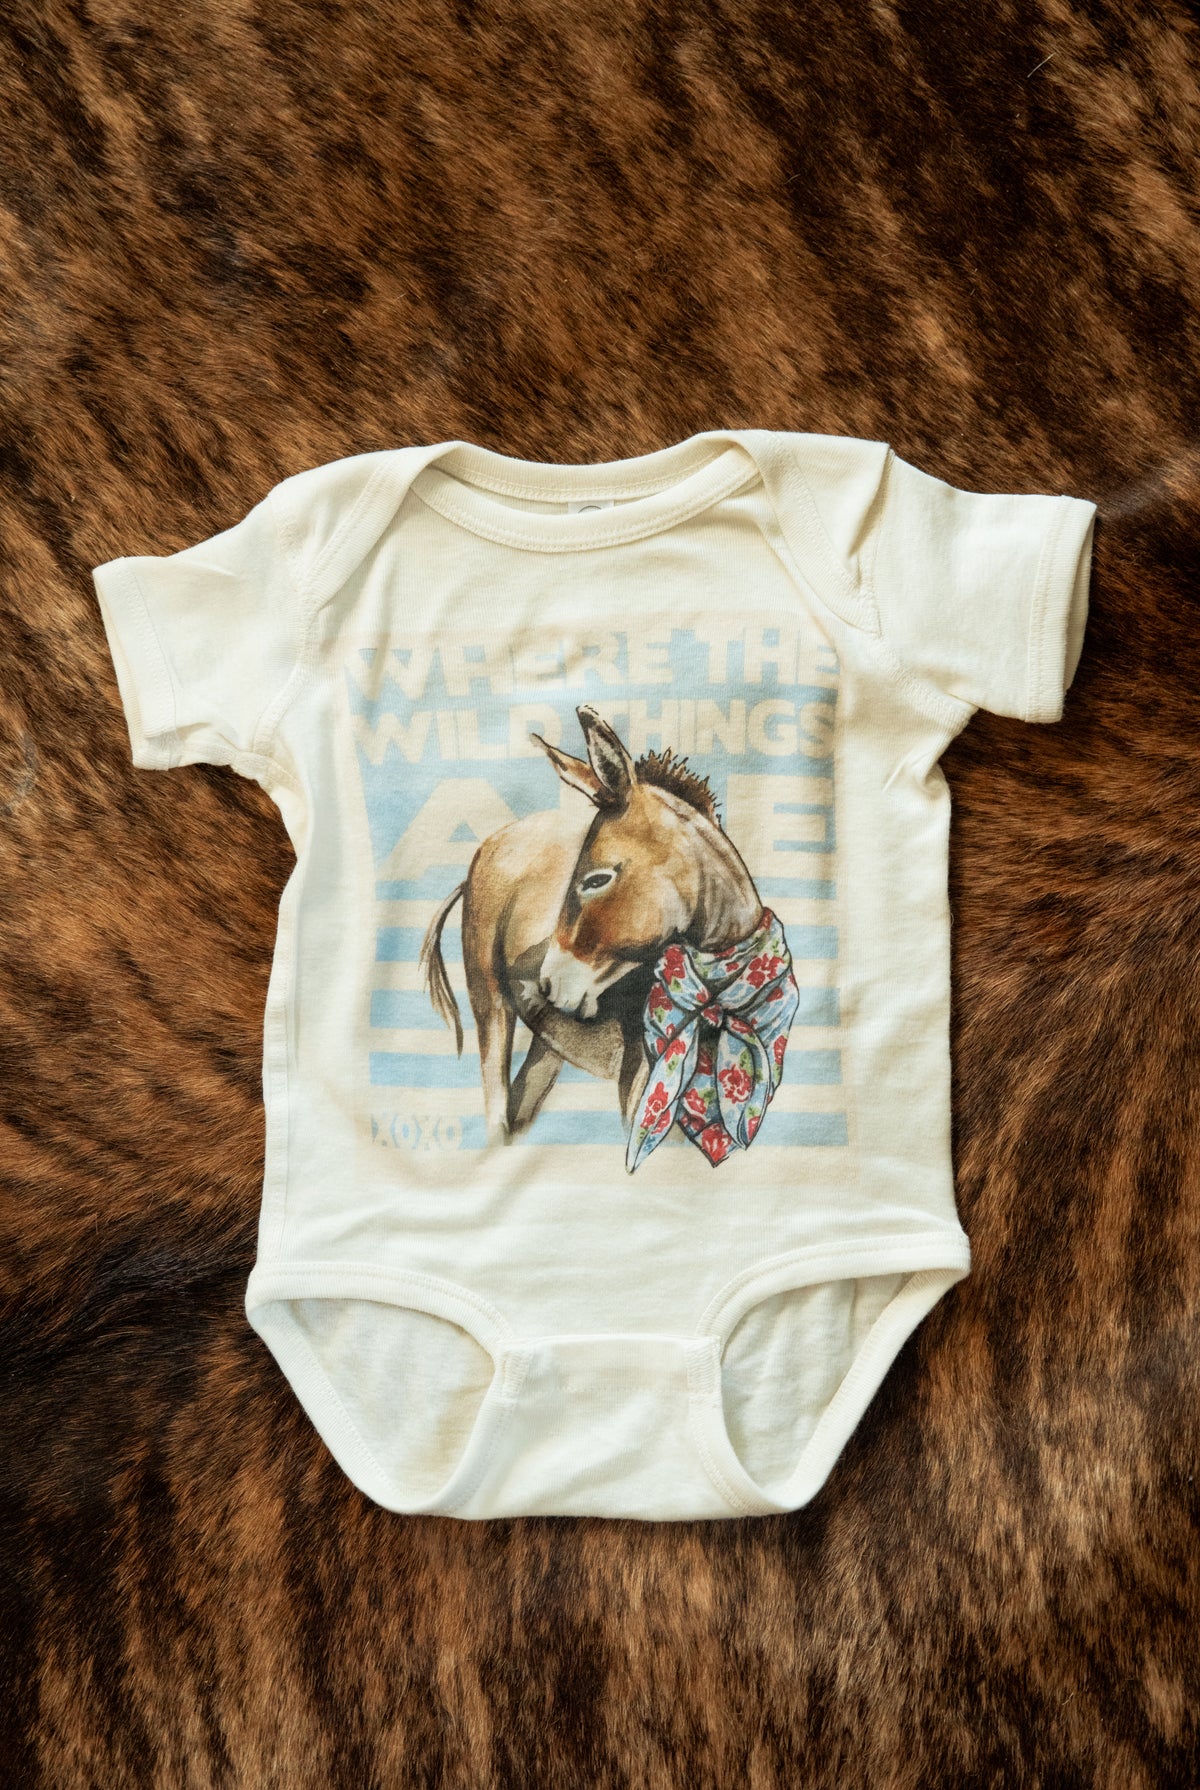 Where the Wild Things Are Onesie - Baby